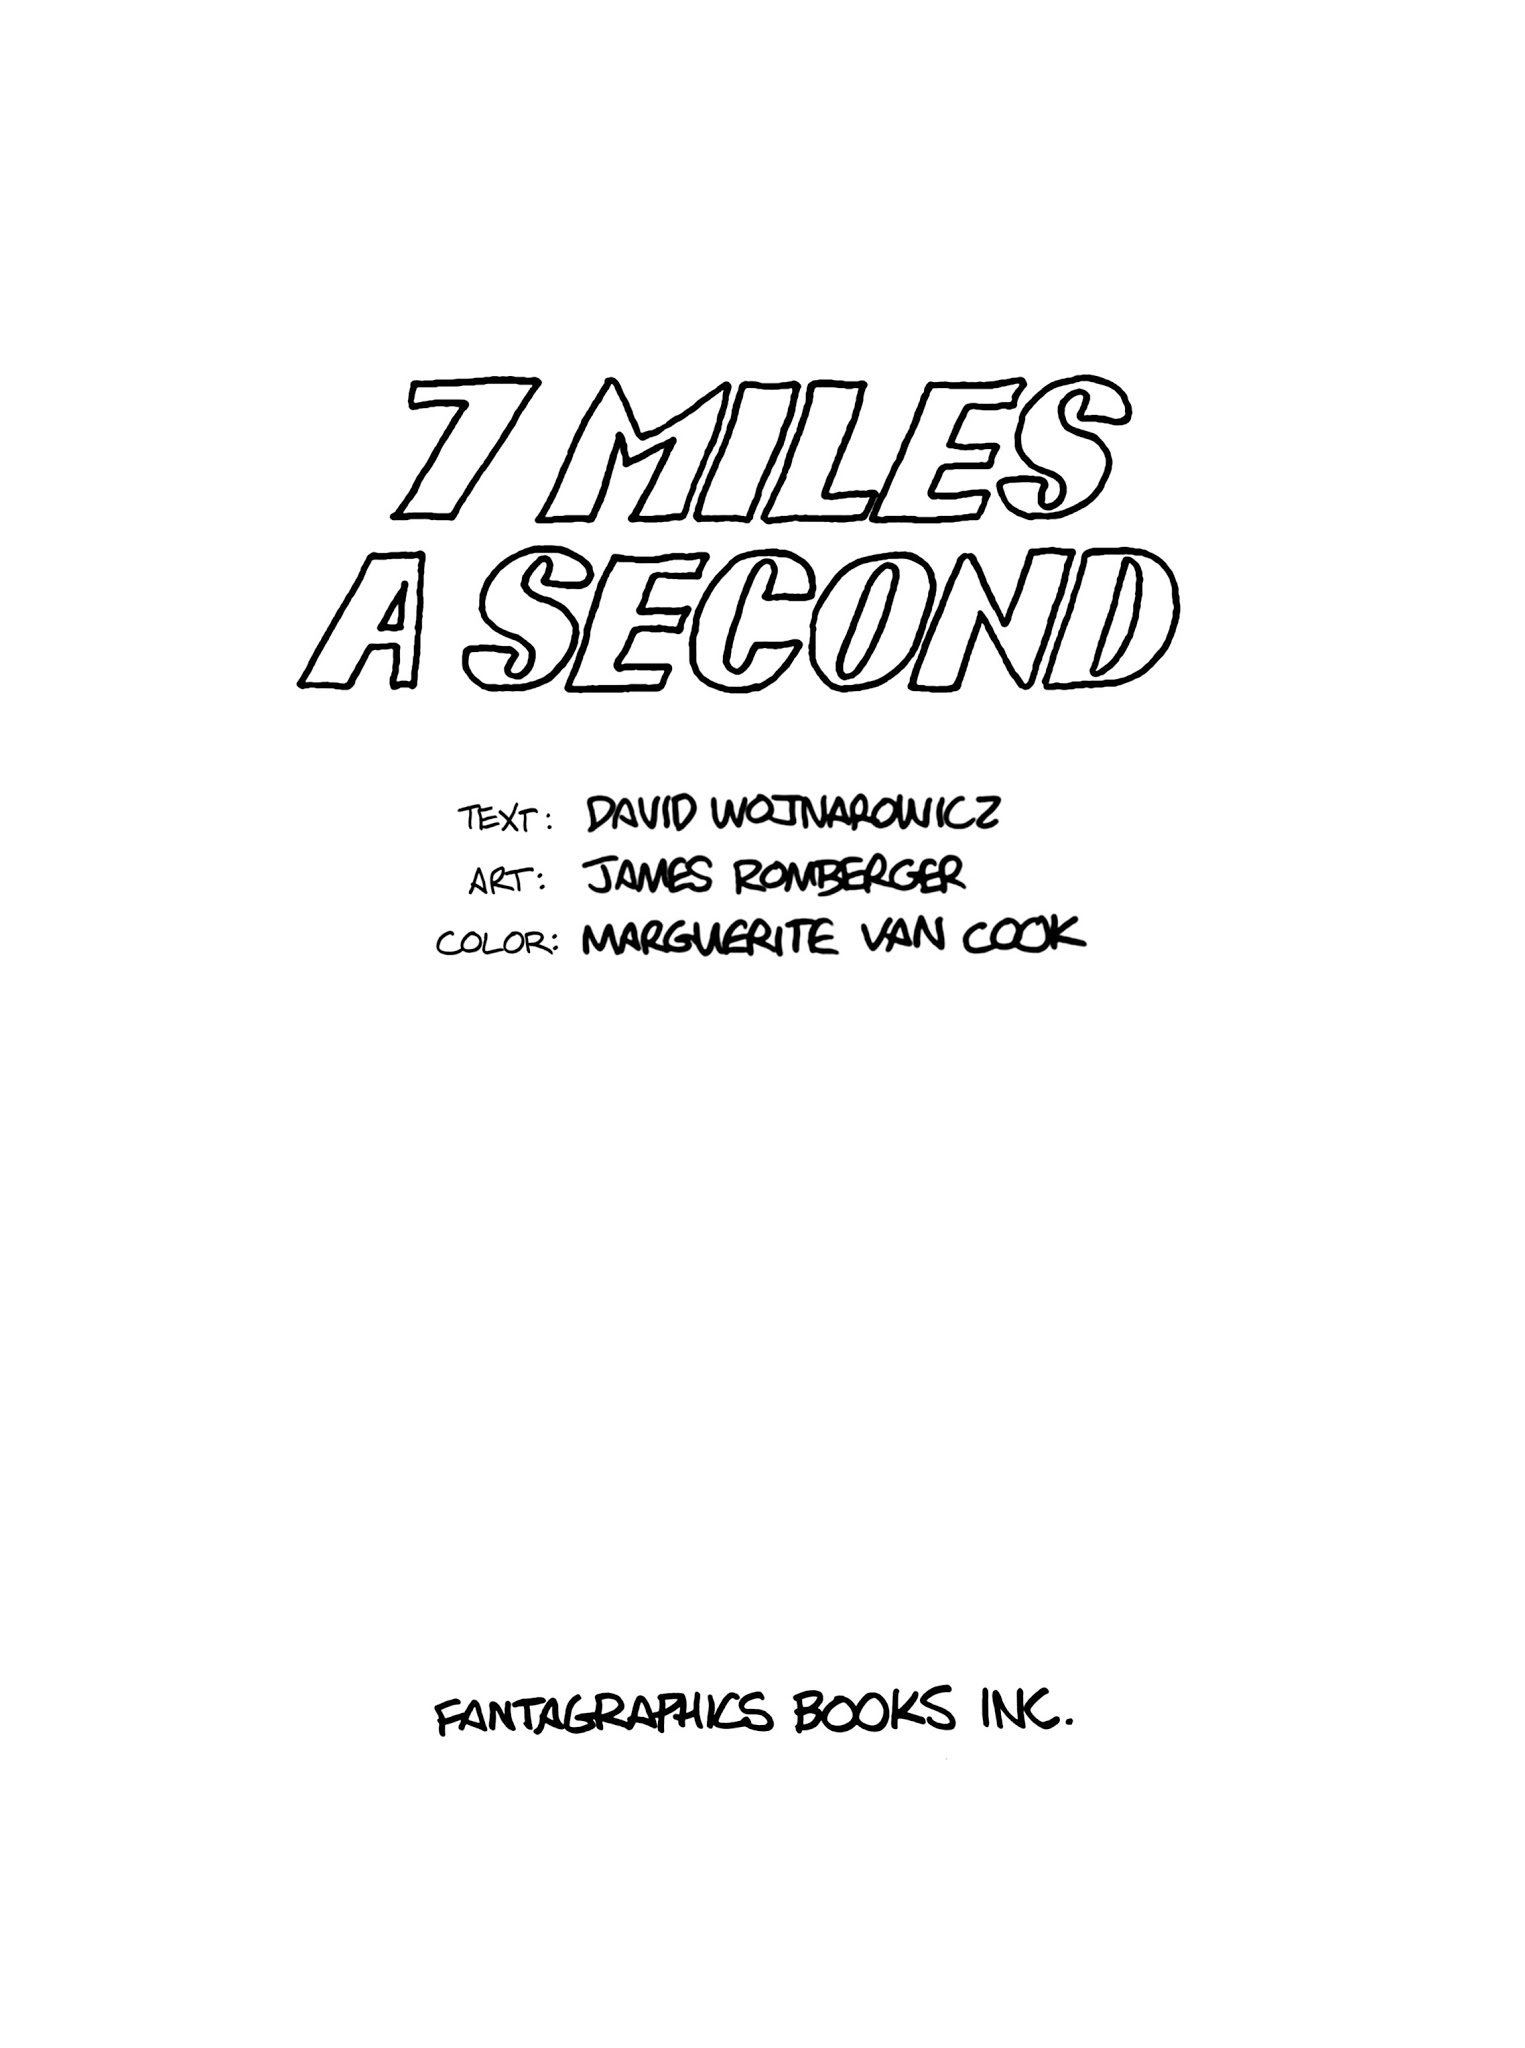 Read online 7 Miles a Second comic -  Issue # TPB - 4